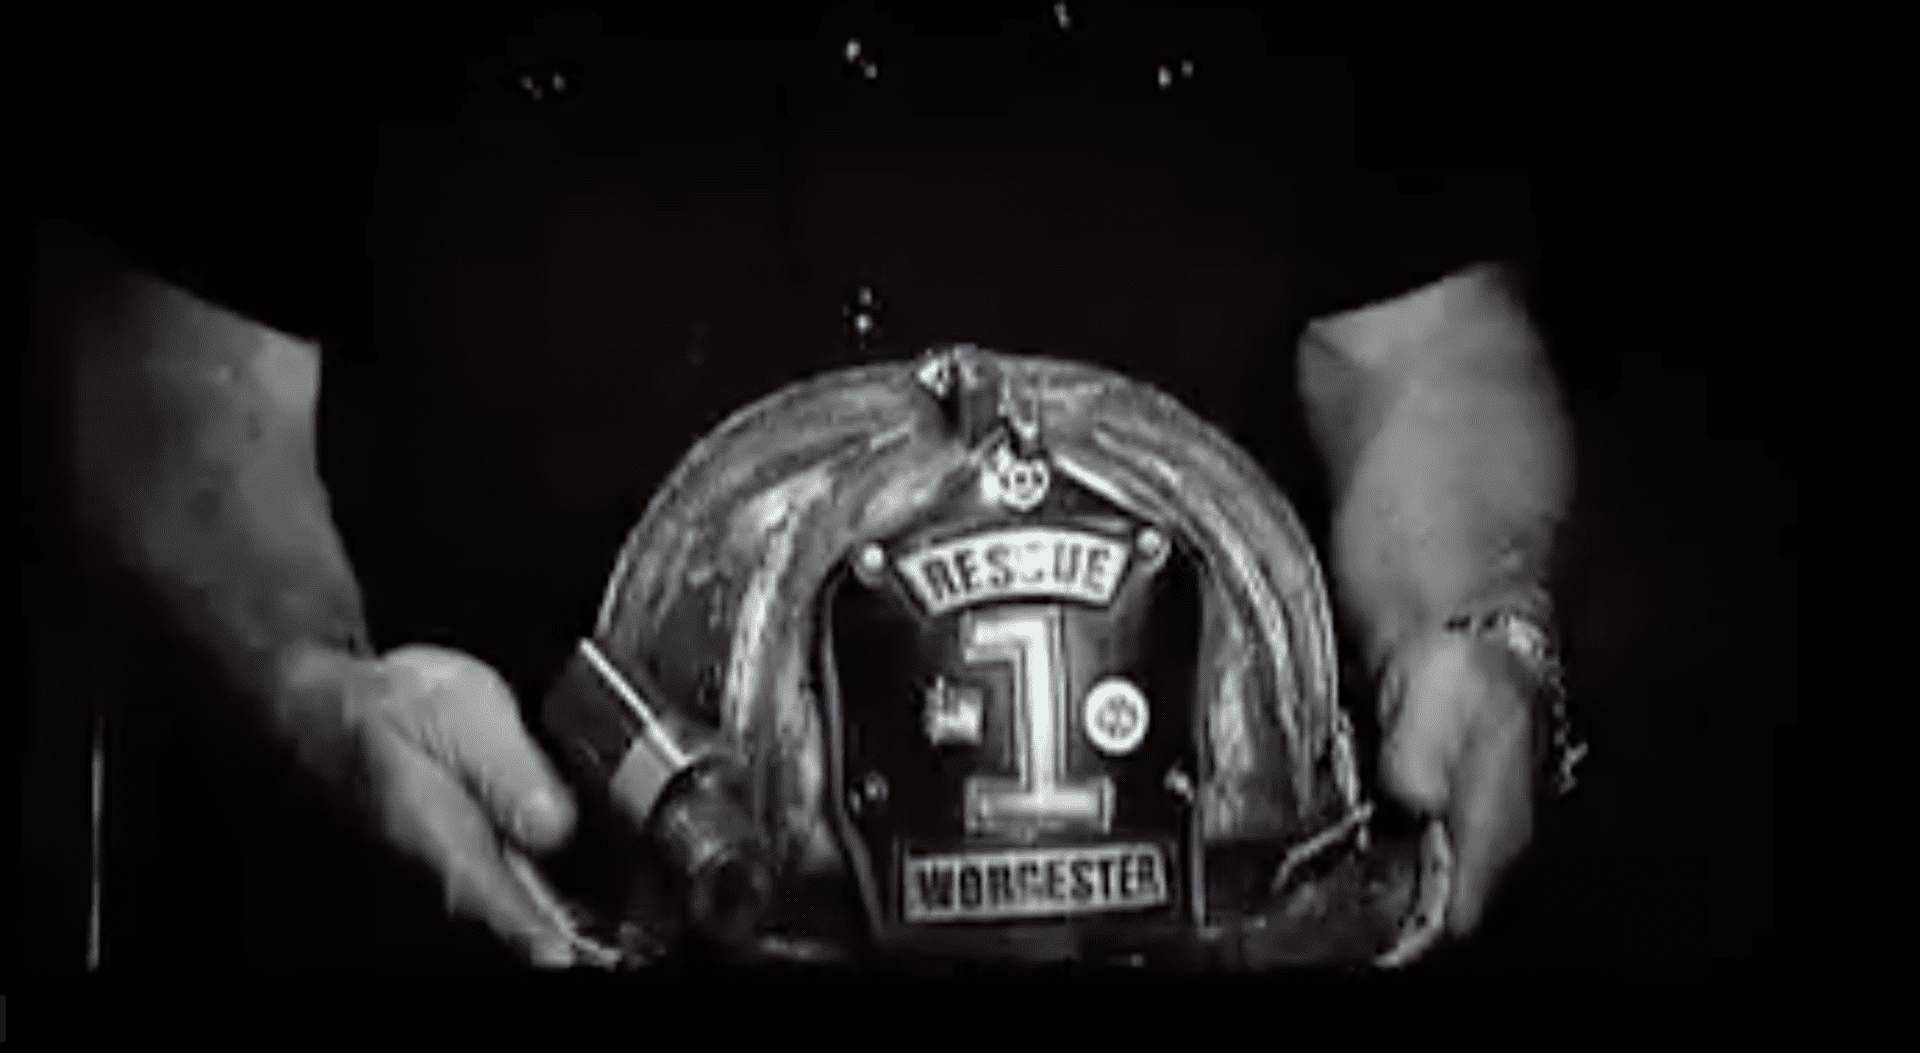 A person holding a fire helmet in their hands.